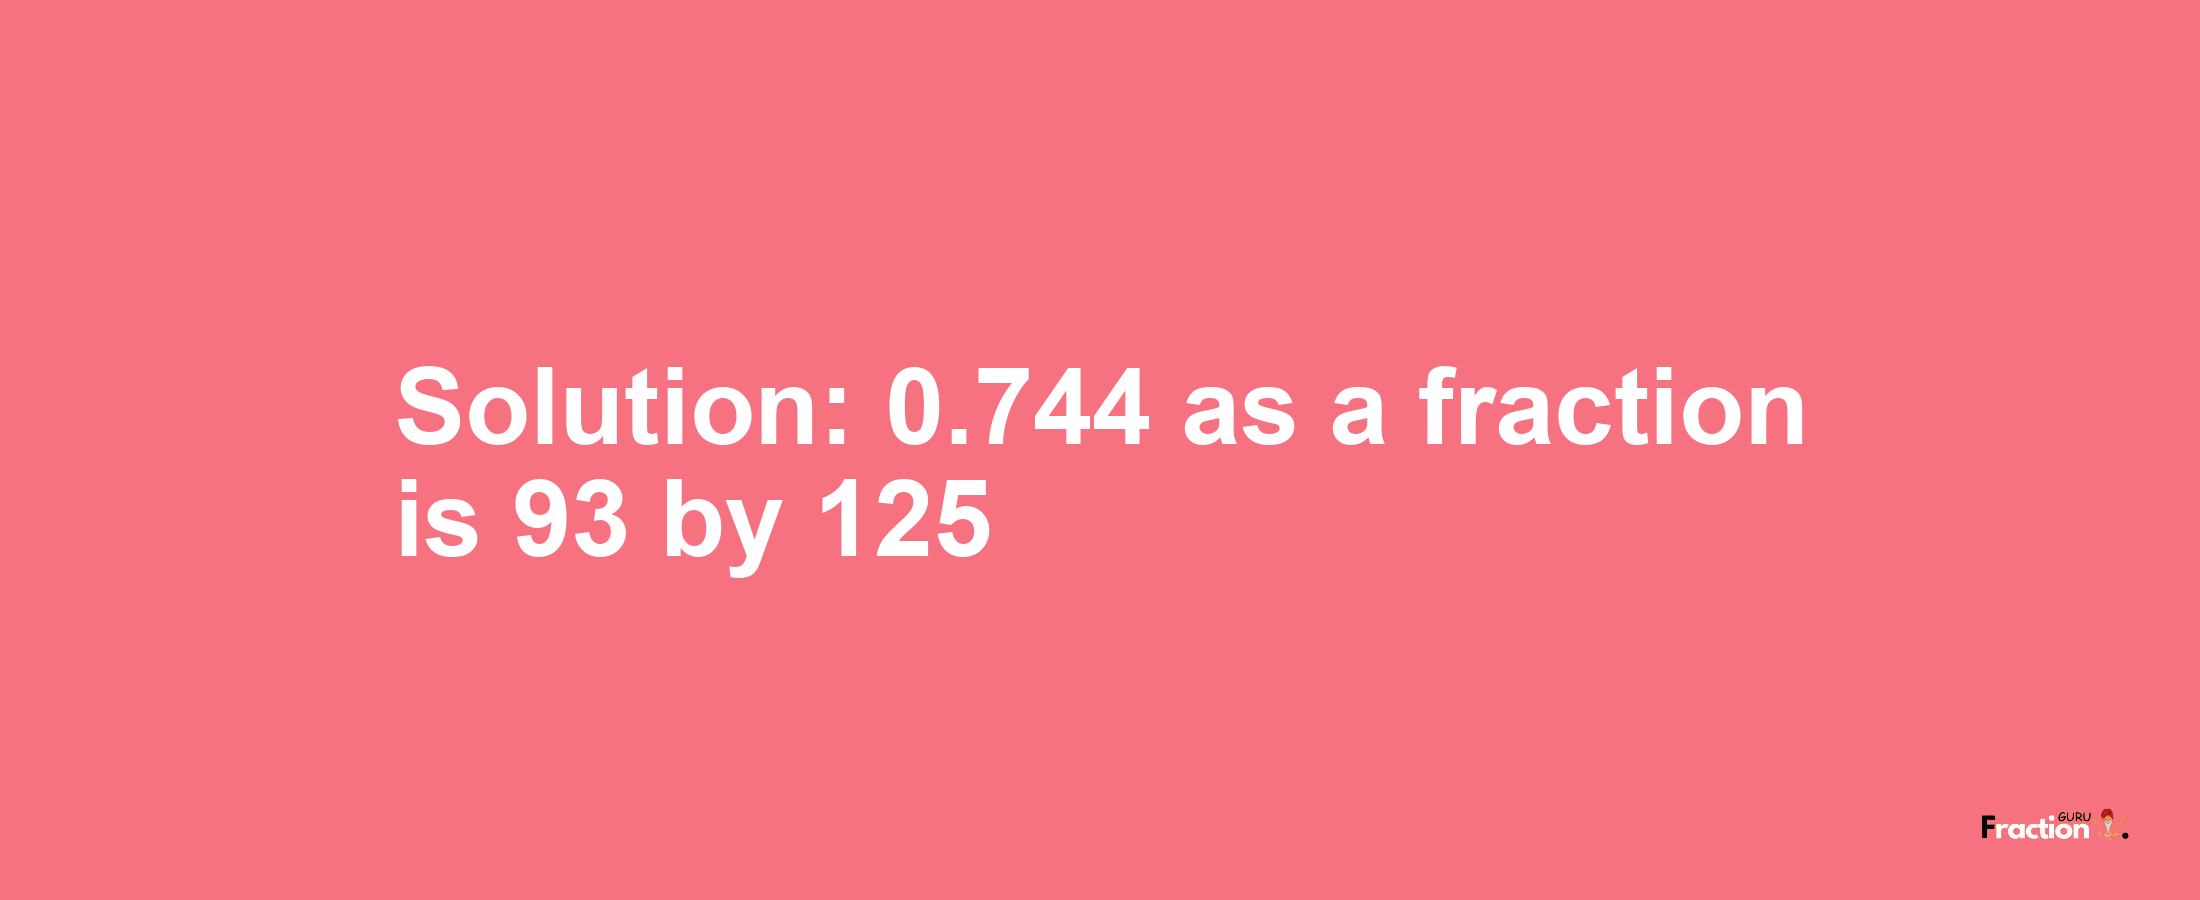 Solution:0.744 as a fraction is 93/125